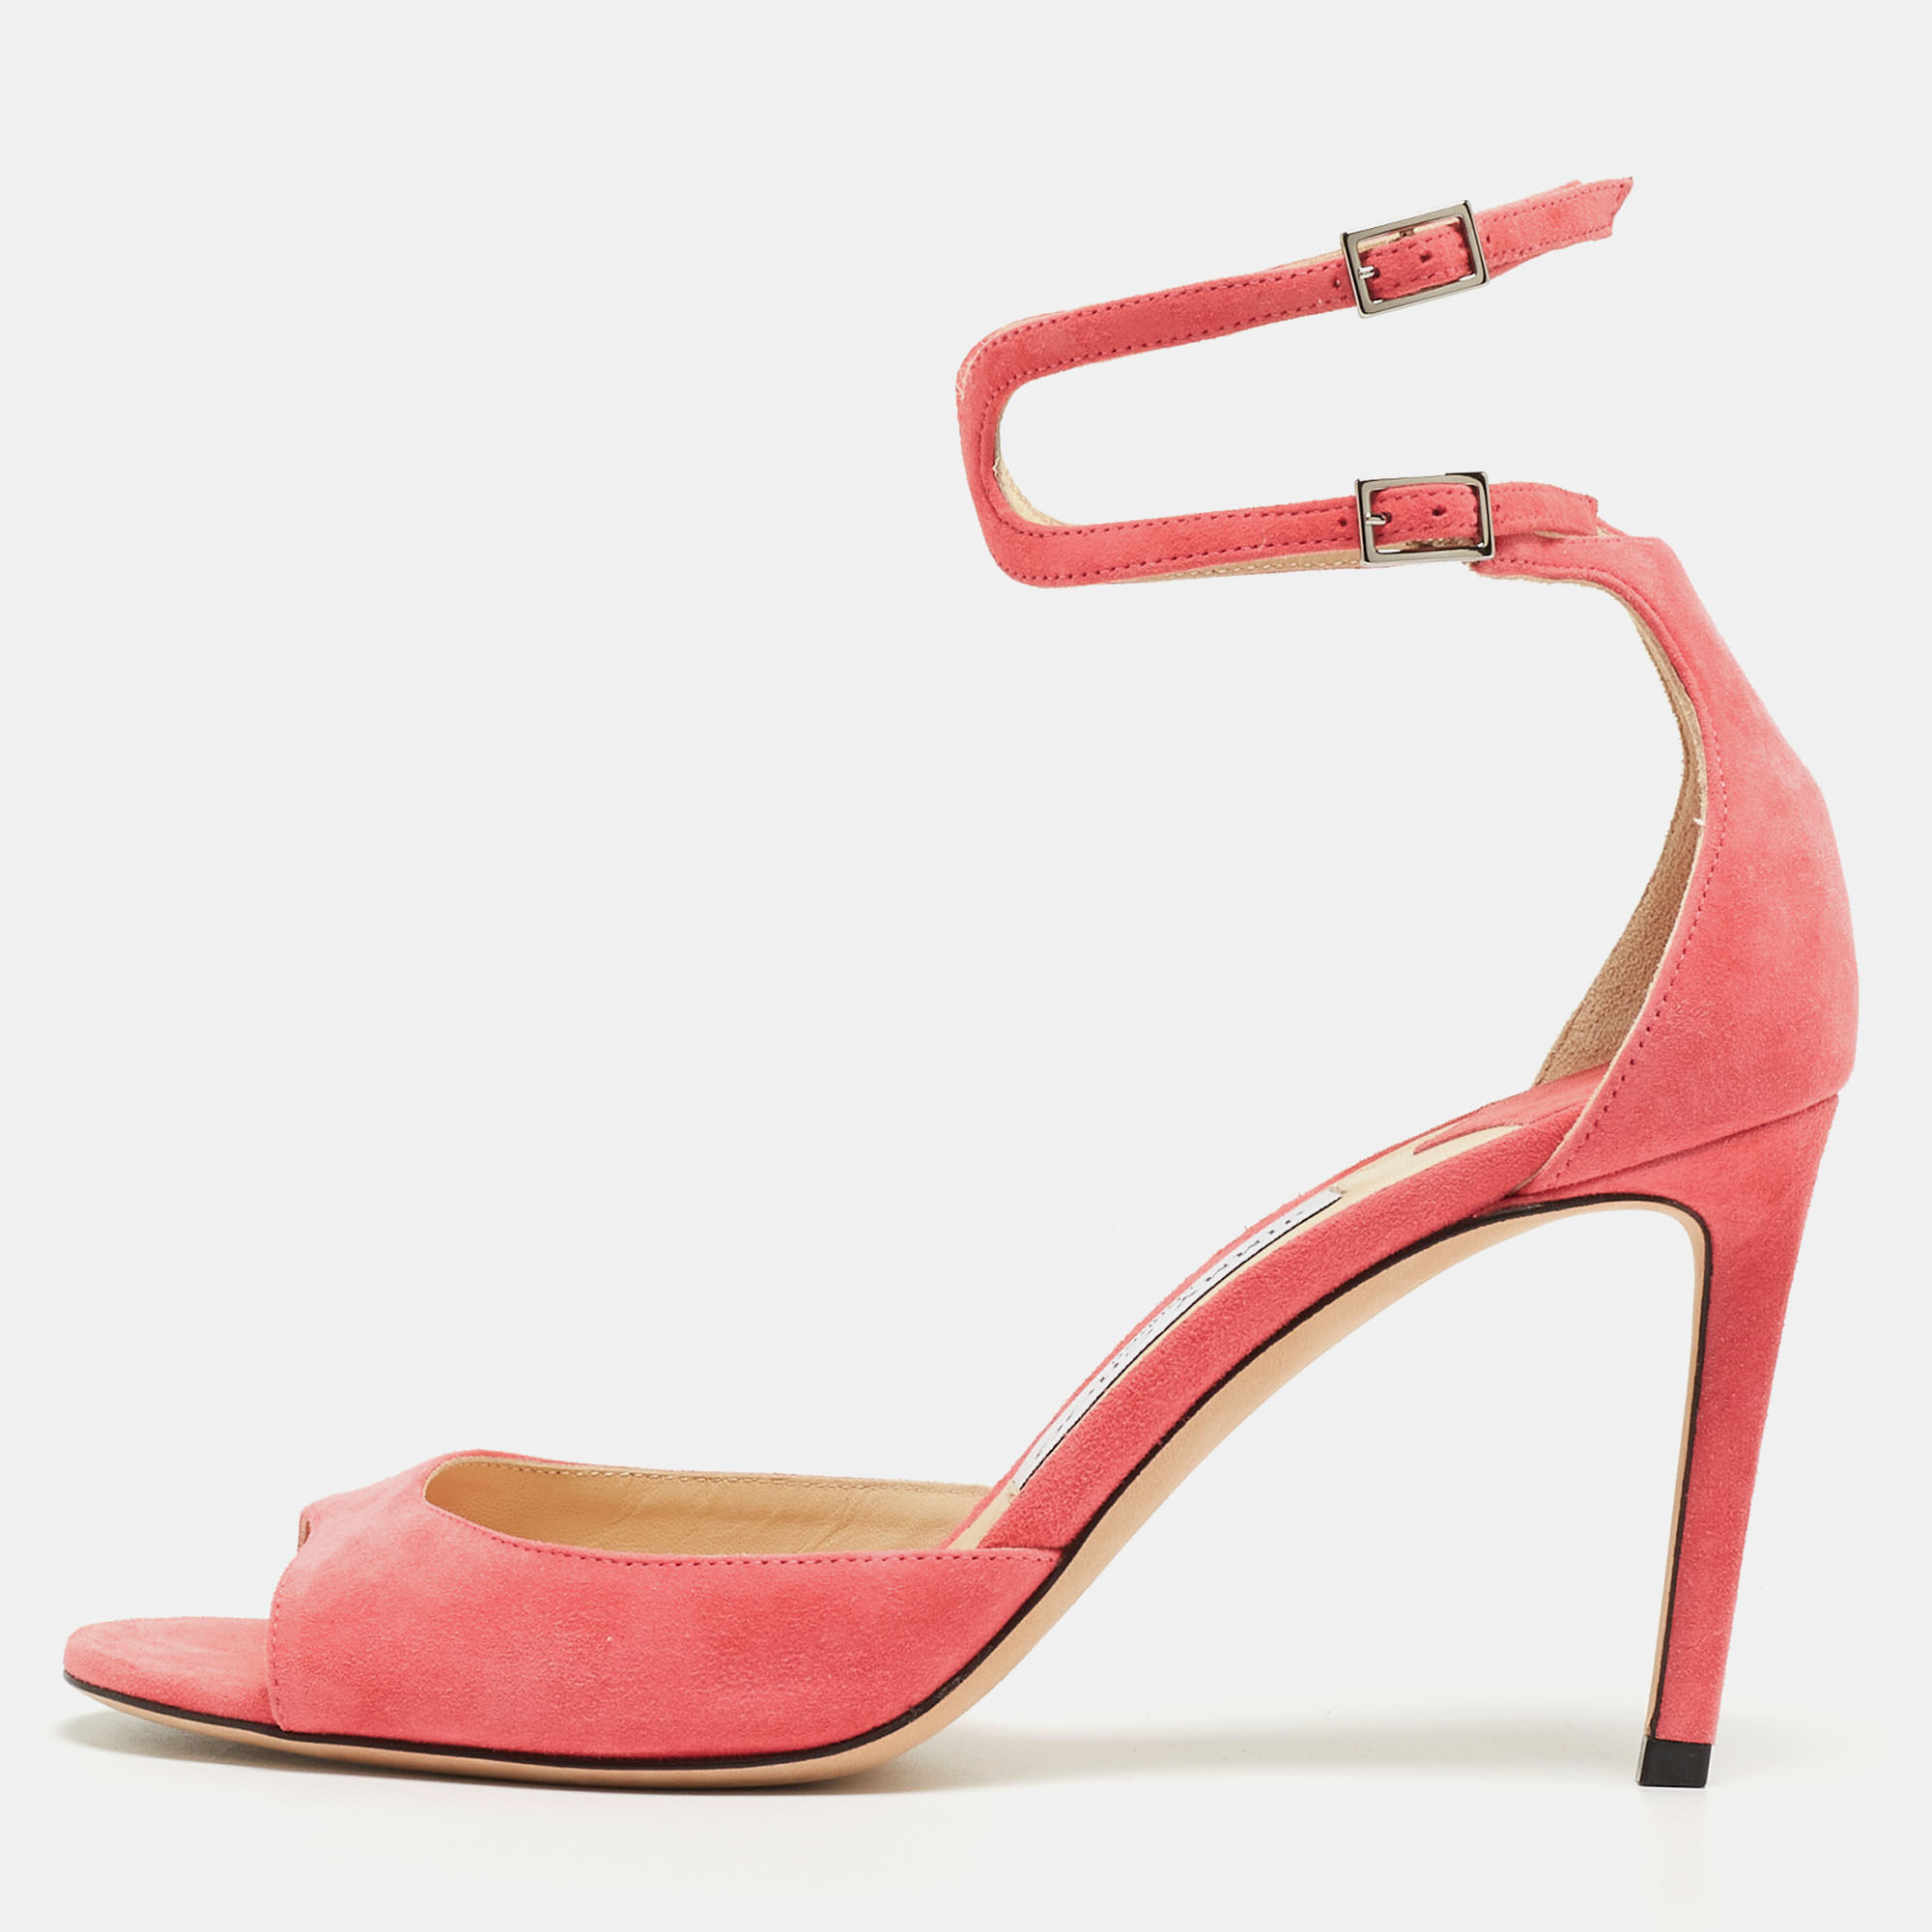 Jimmy Choo Pink Suede Lane Sandals Size 38.5